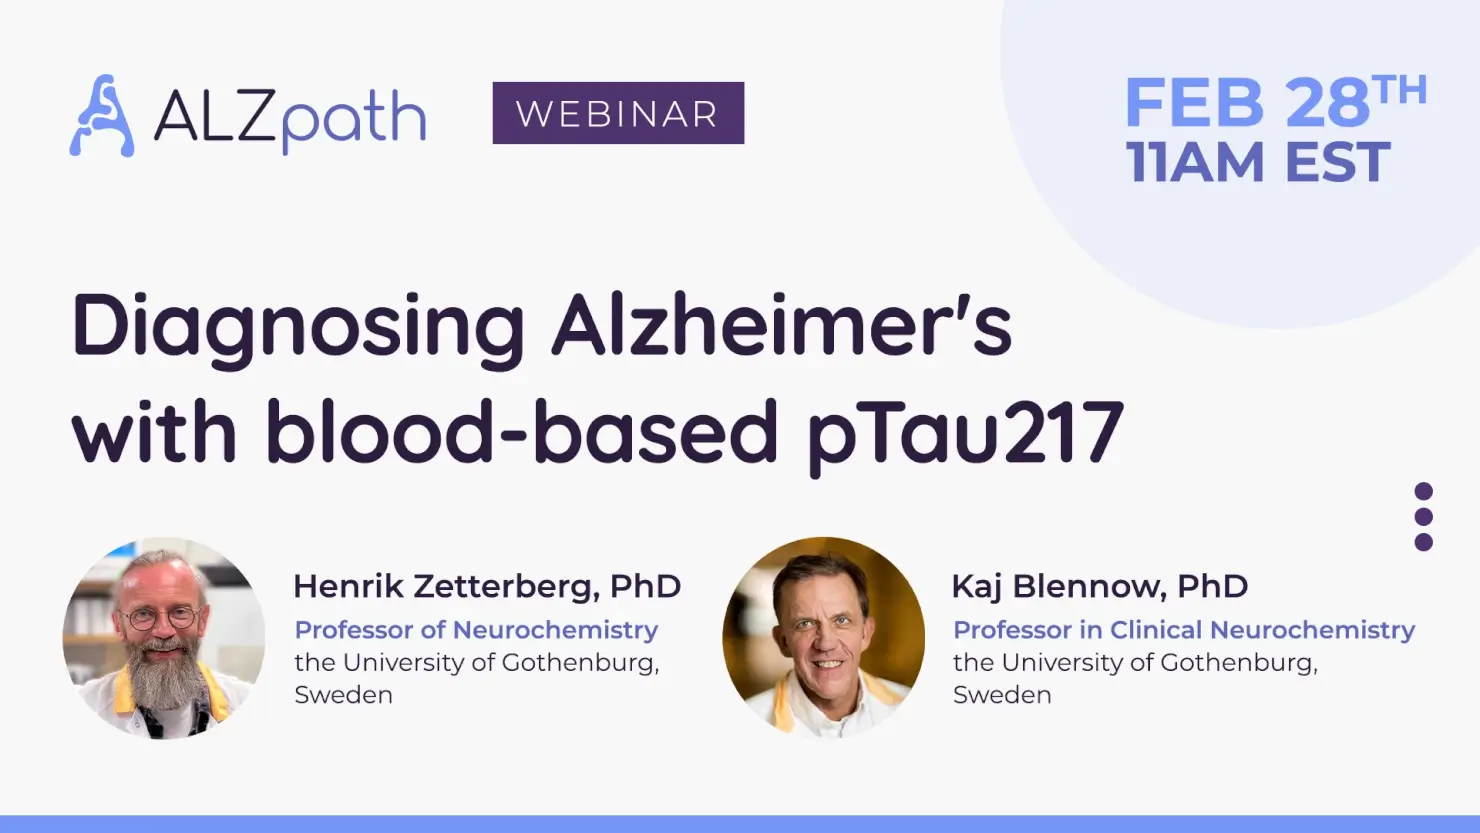 Diagnosing Alzheimer's with blood-based pTau217